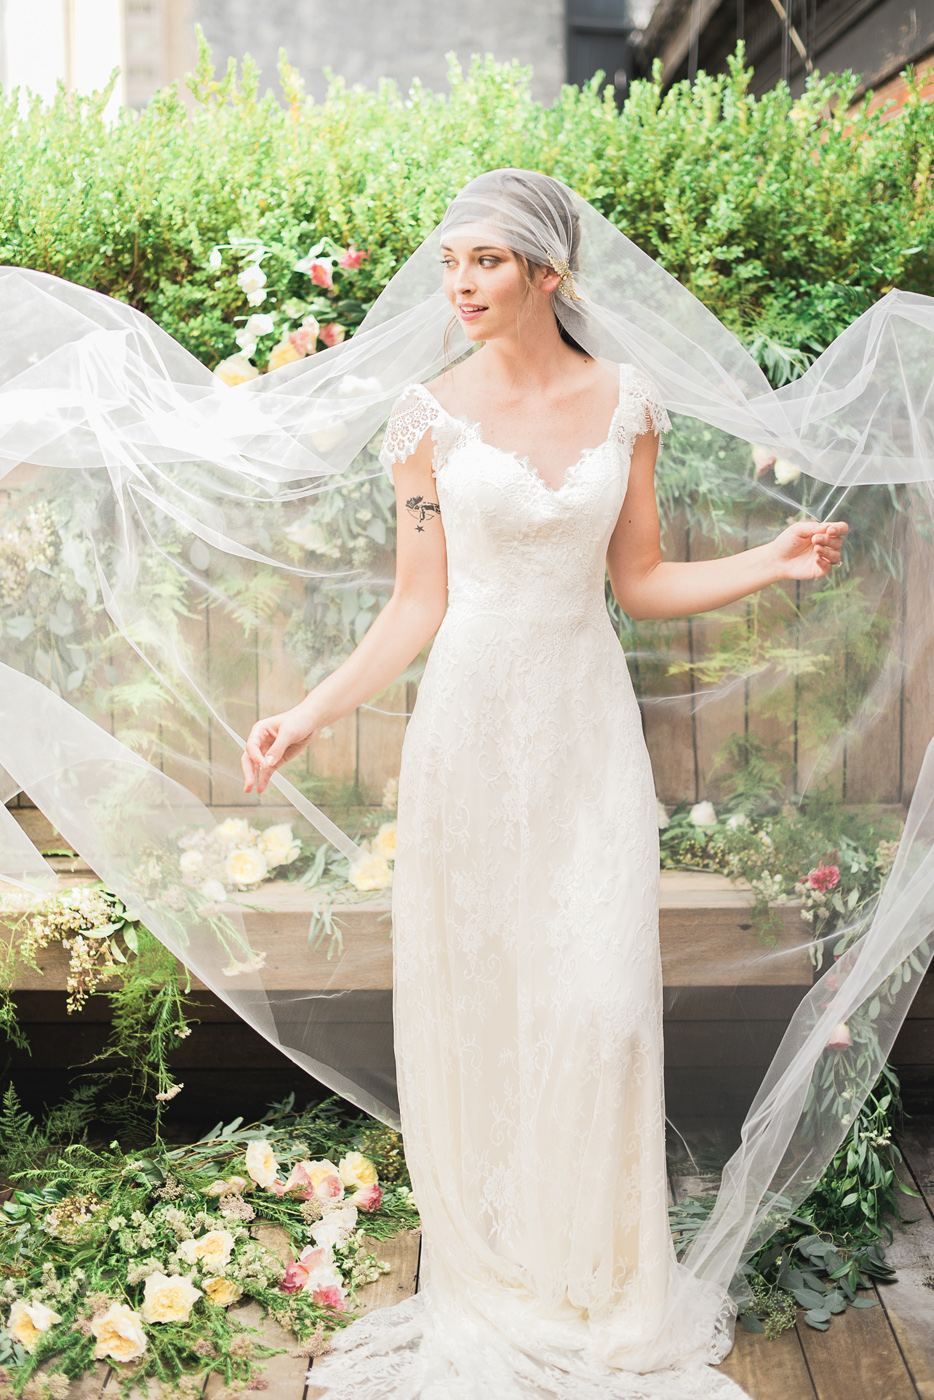 juliet cap tulle veil with gold vine flower crystal detail lace gown hushed commotion